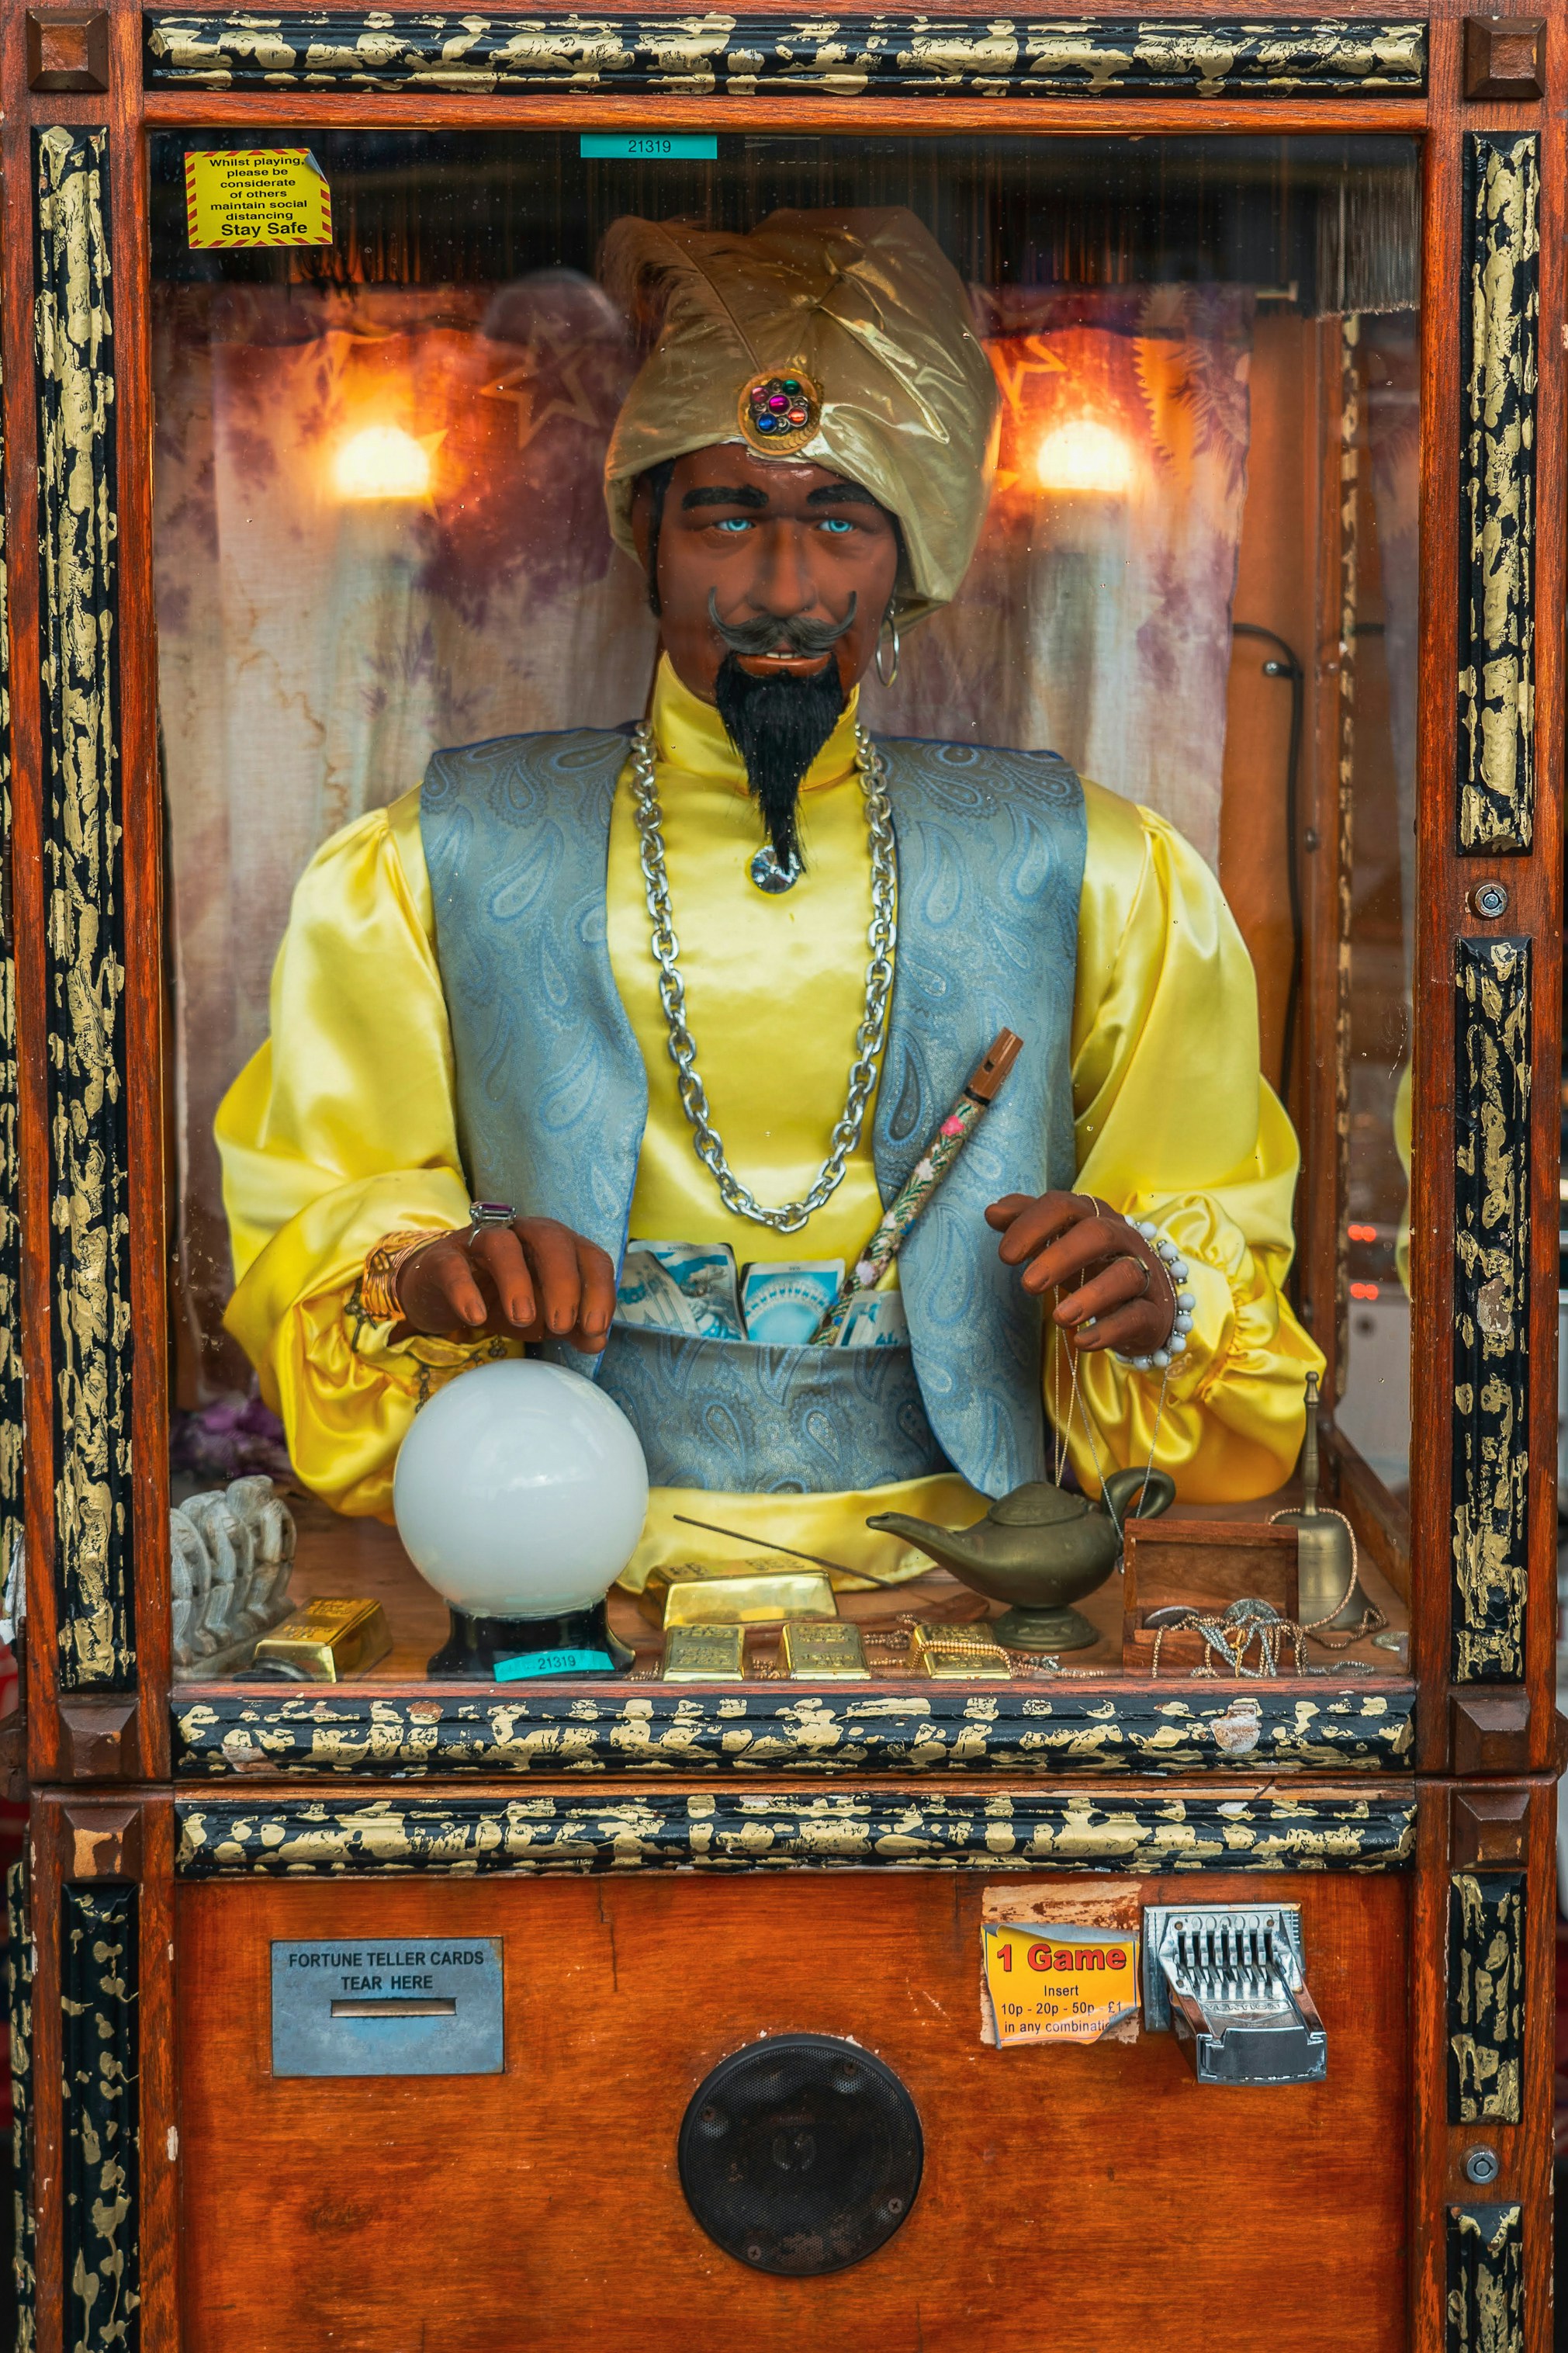 A fortune teller sideshow, similar to that featured in the film, Big.